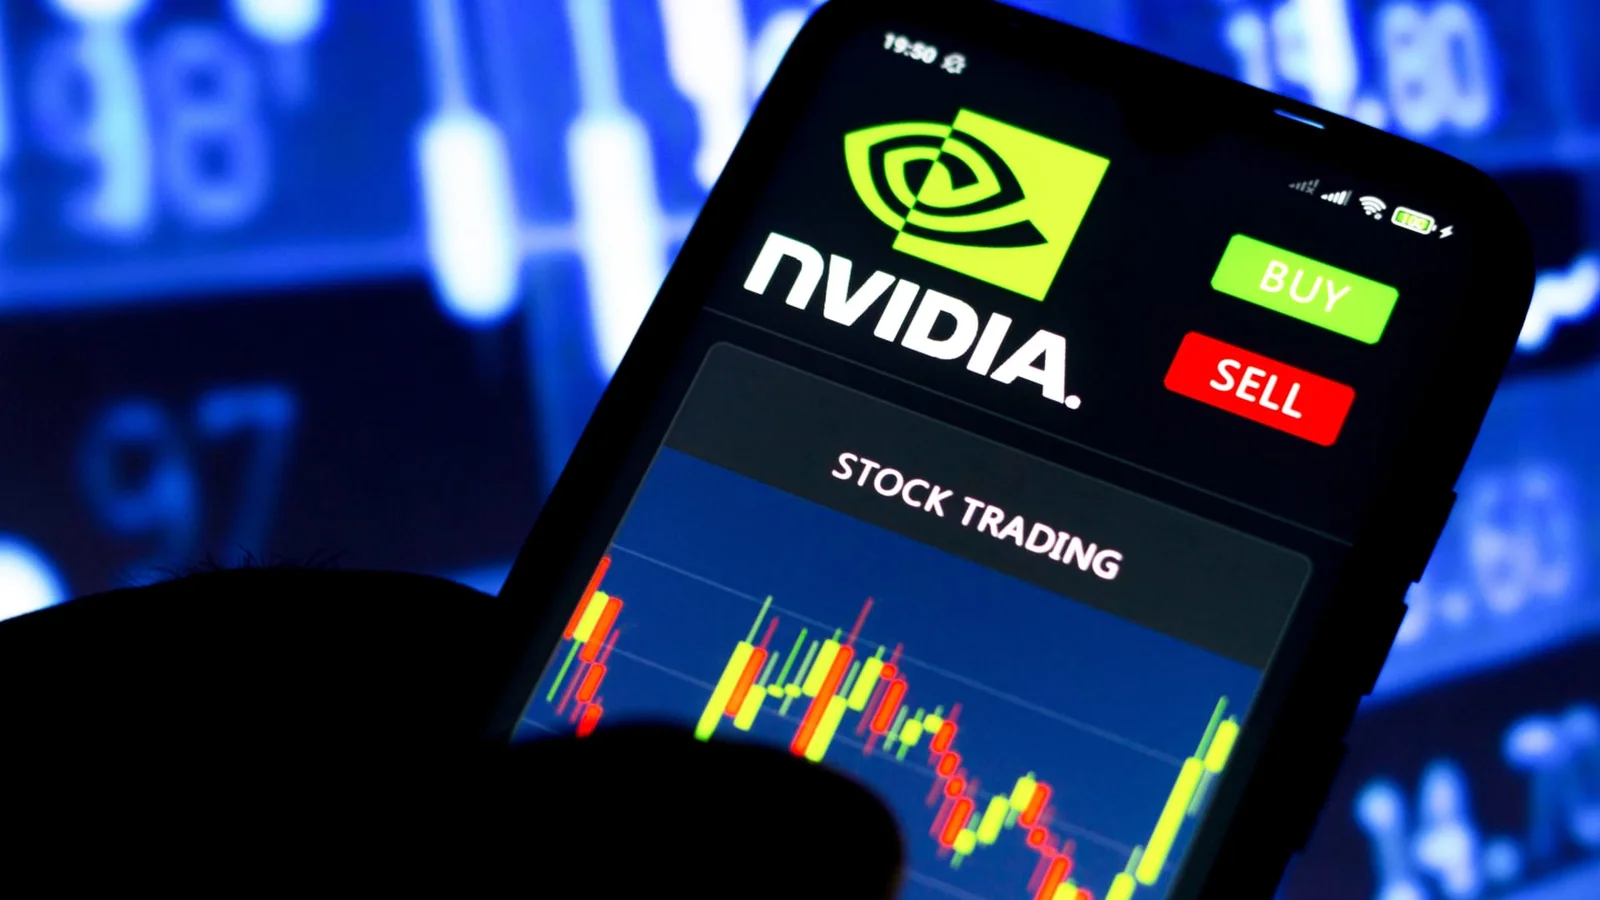 Nvidia Stock Going Down